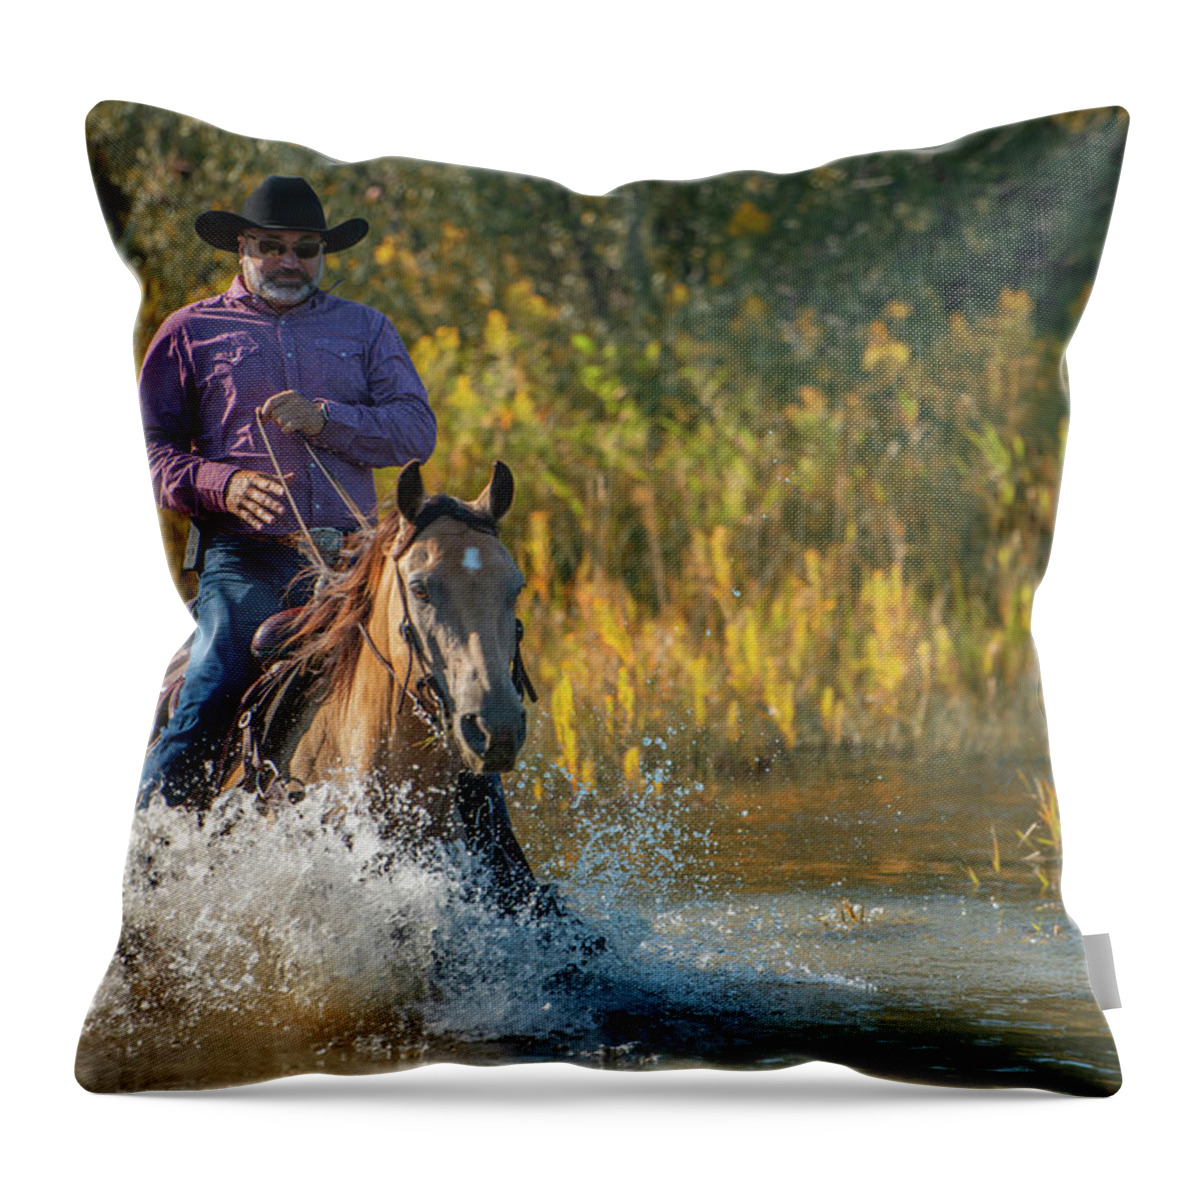  Throw Pillow featuring the photograph Untitled #36 by Ryan Courson